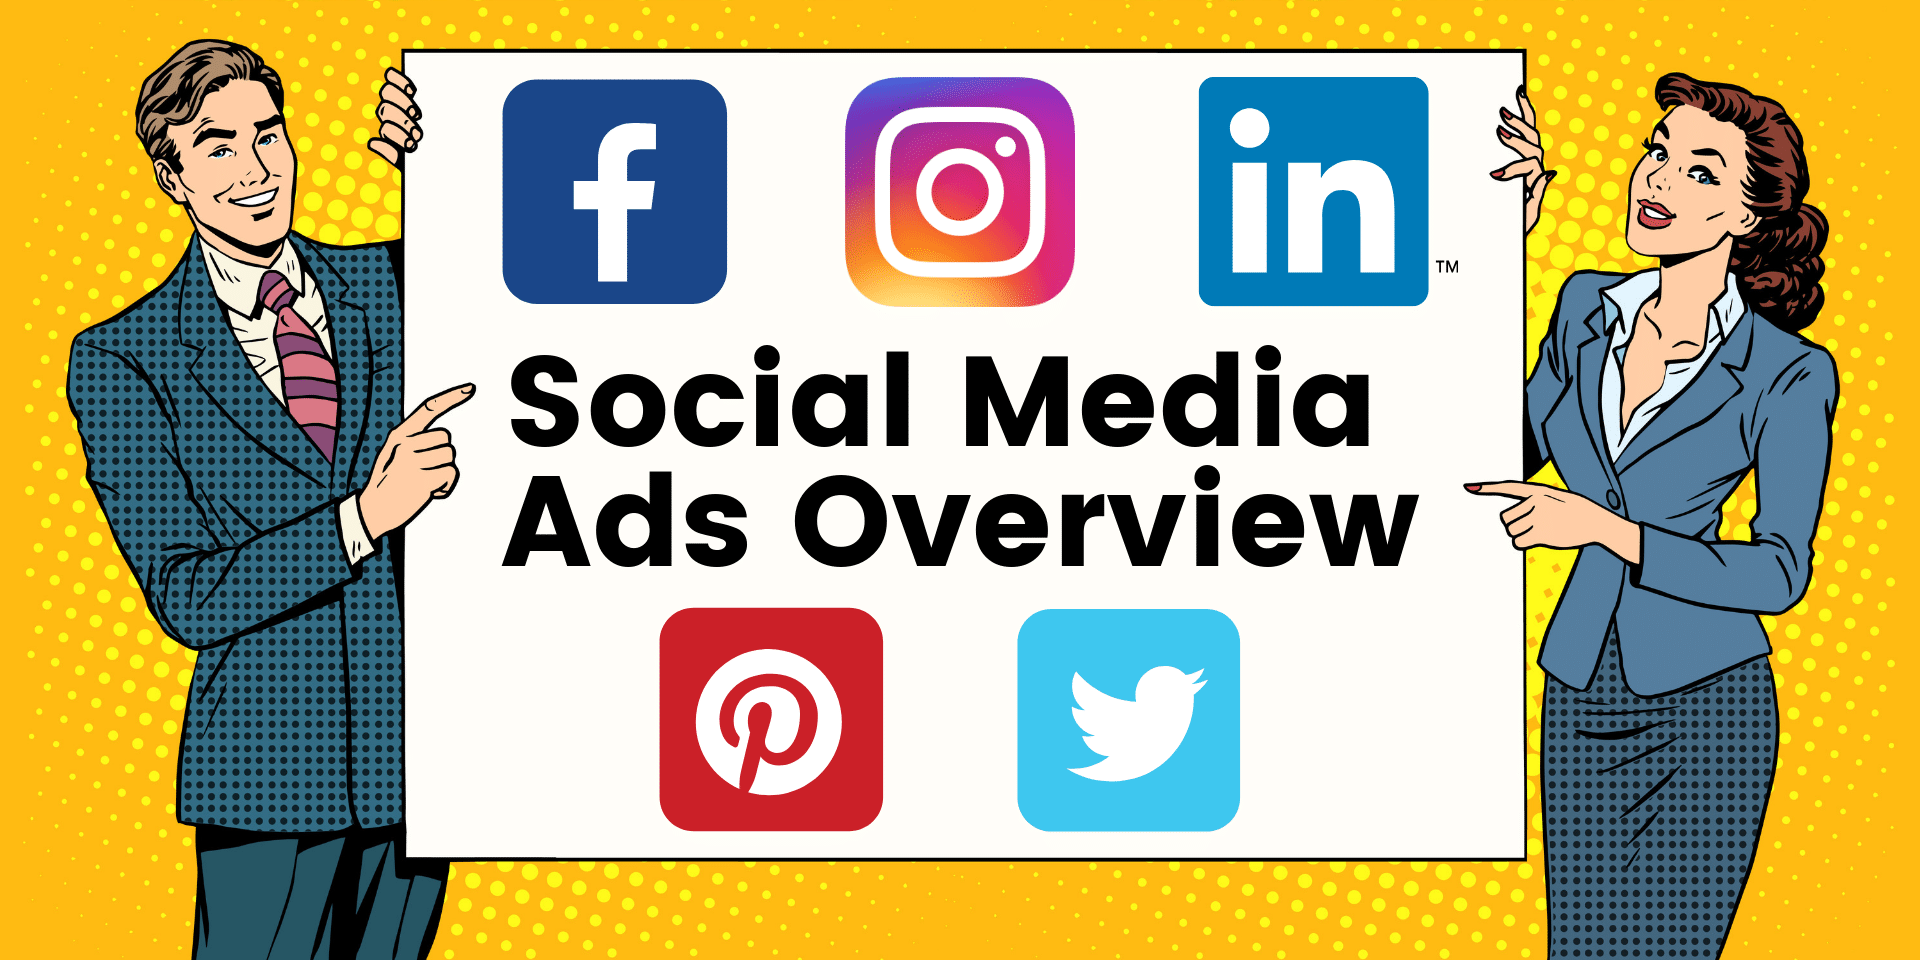 Social Media Ads Basics You Need To Know About Each Platform